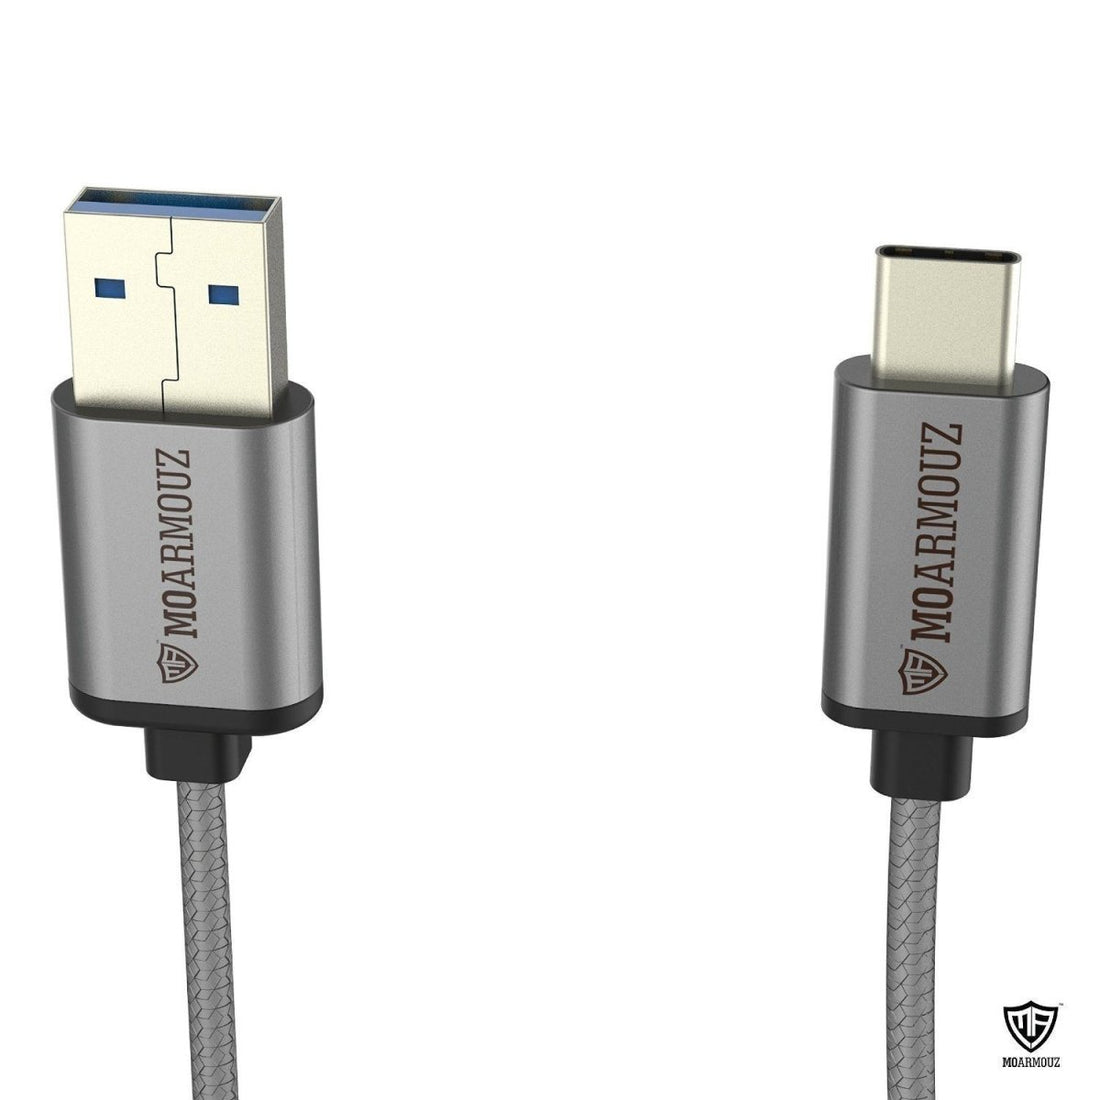 MoArmouz USB Type C - USB 3.0 Braided Cable is your new “must have” - Moarmouz